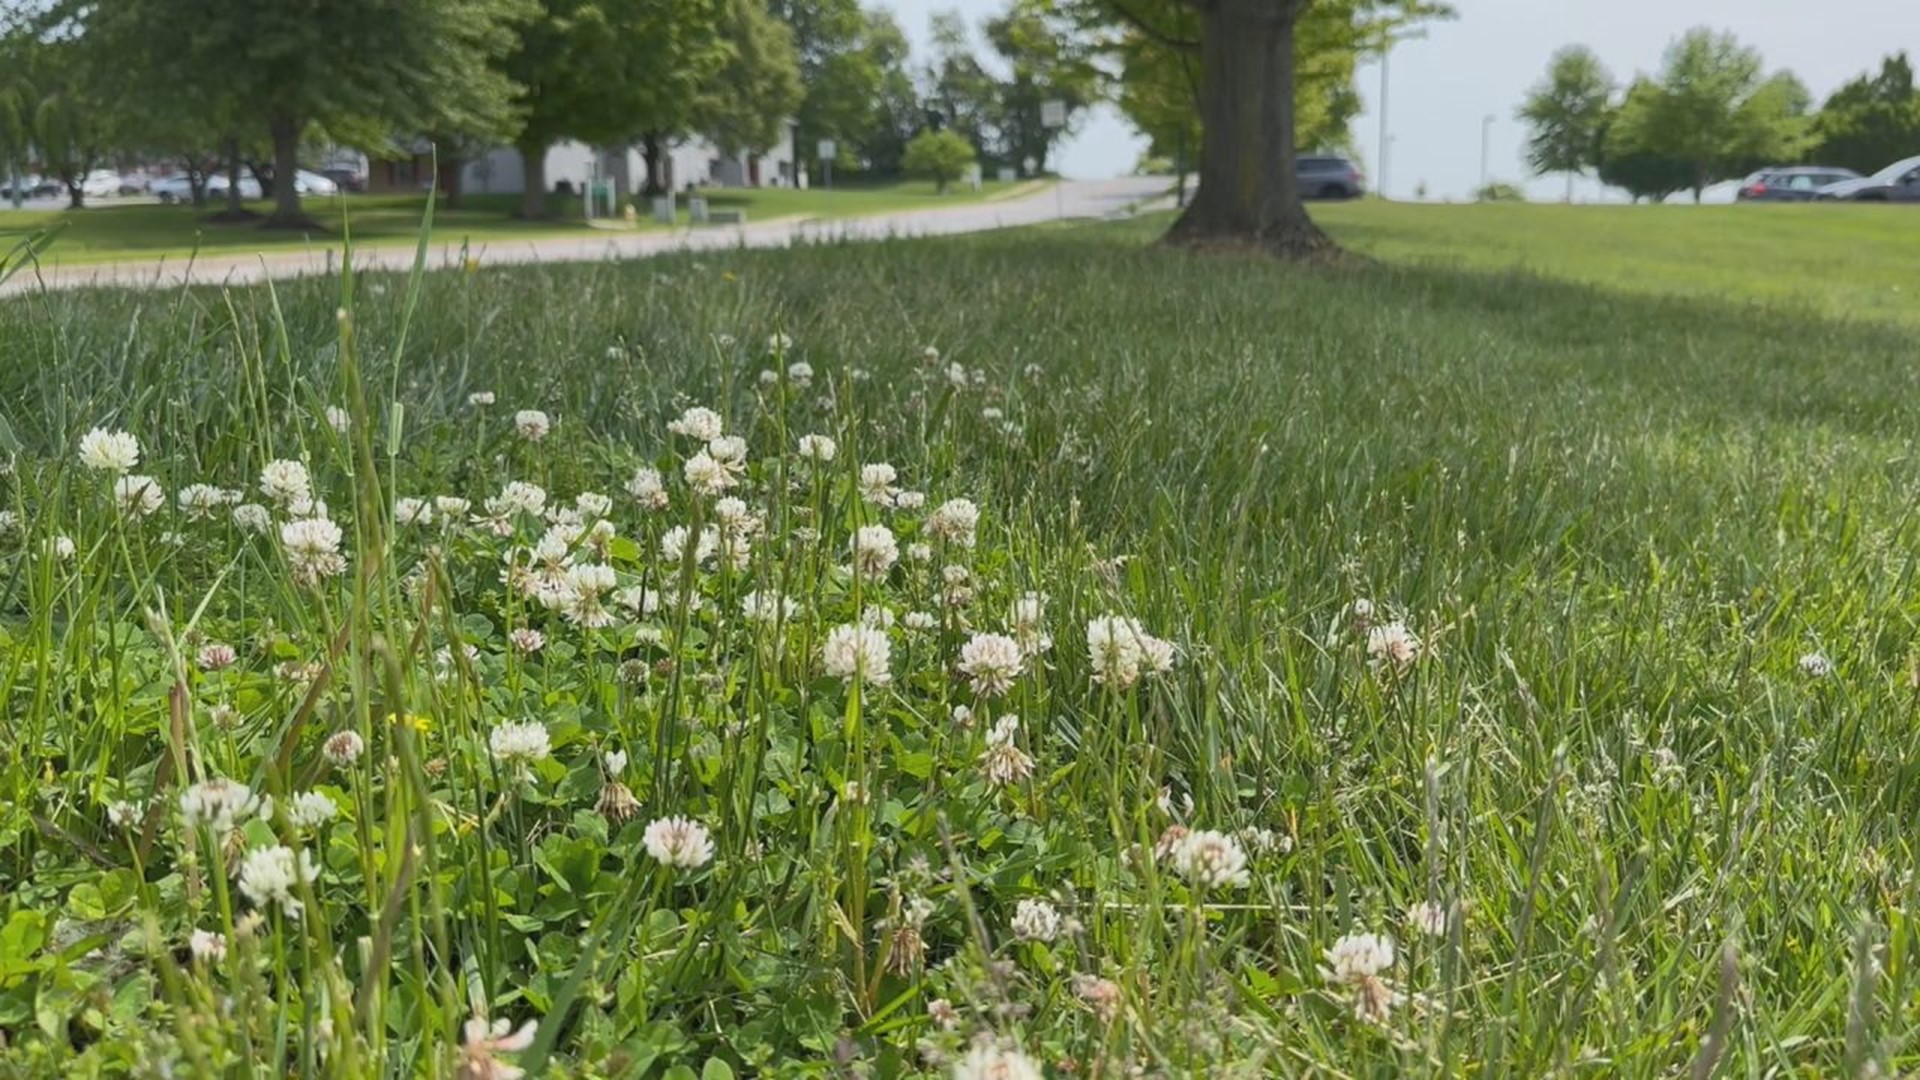 While homeowners typically try to remove all weeds from their yards, clover lawns and other pollinator-friendly options are becoming more popular across the country.